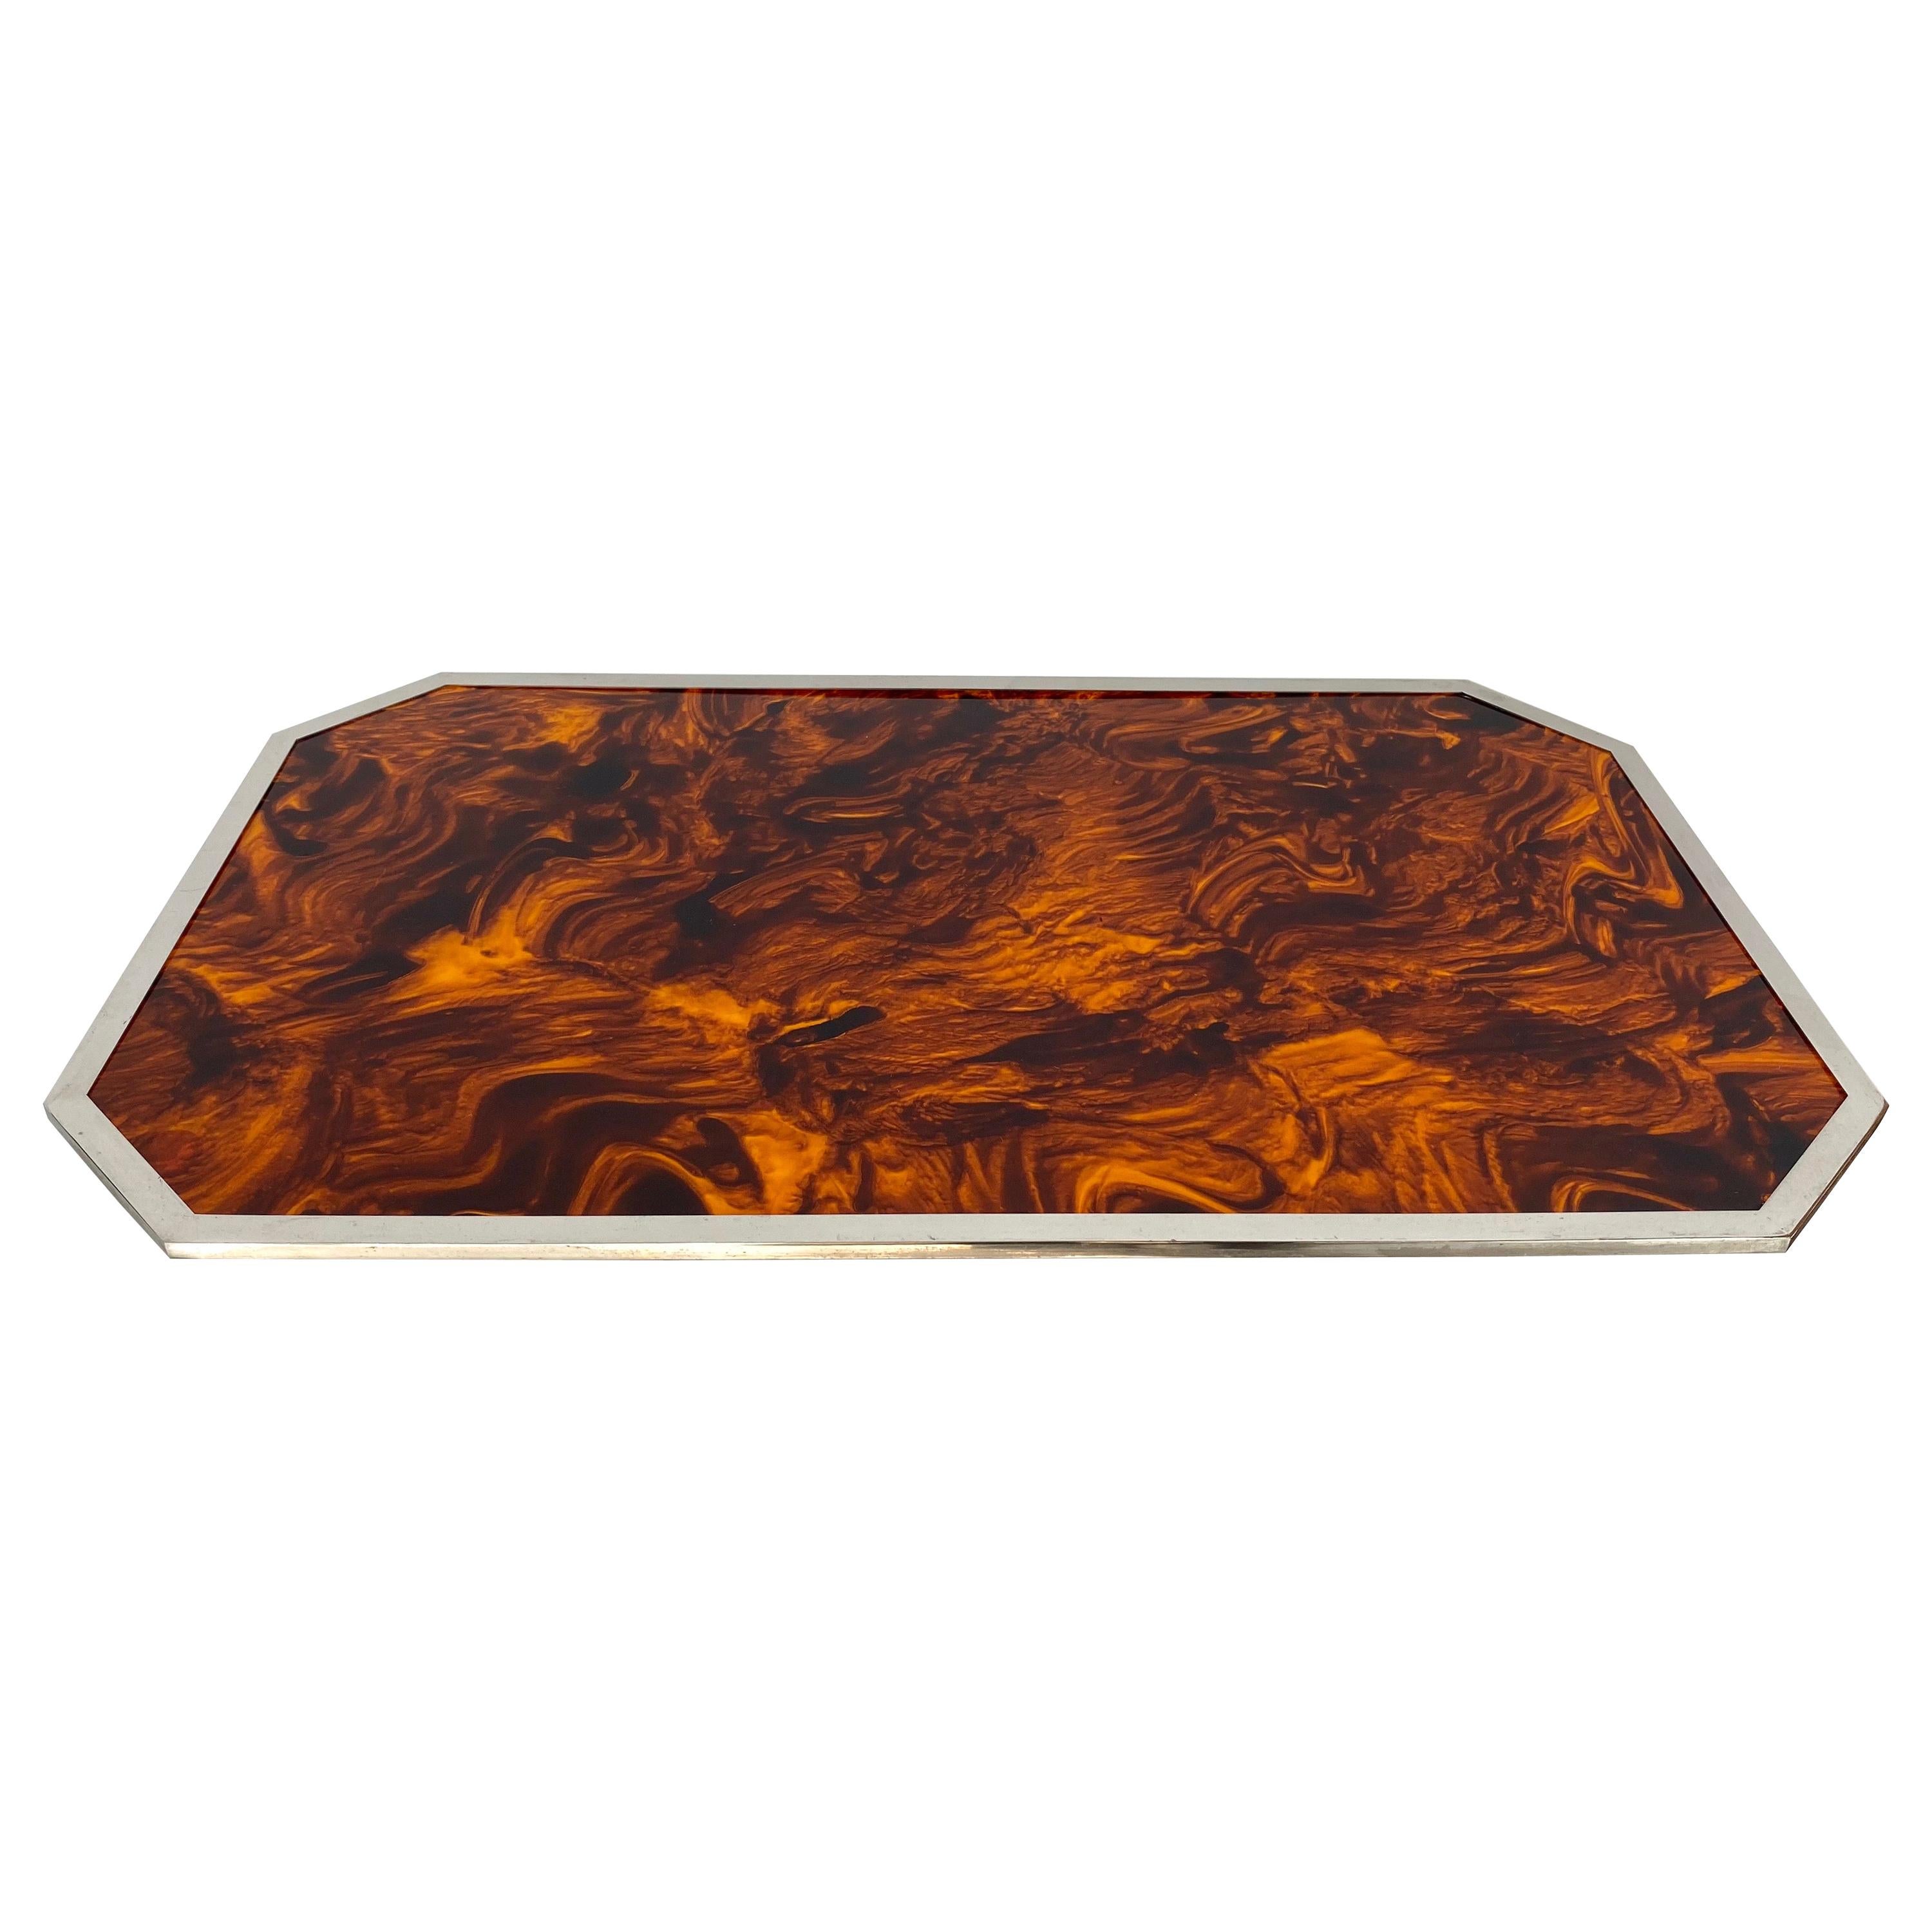 Christian Dior Tortoiseshell and Lucite and Chrome Serving Tray, Italy, 1970s